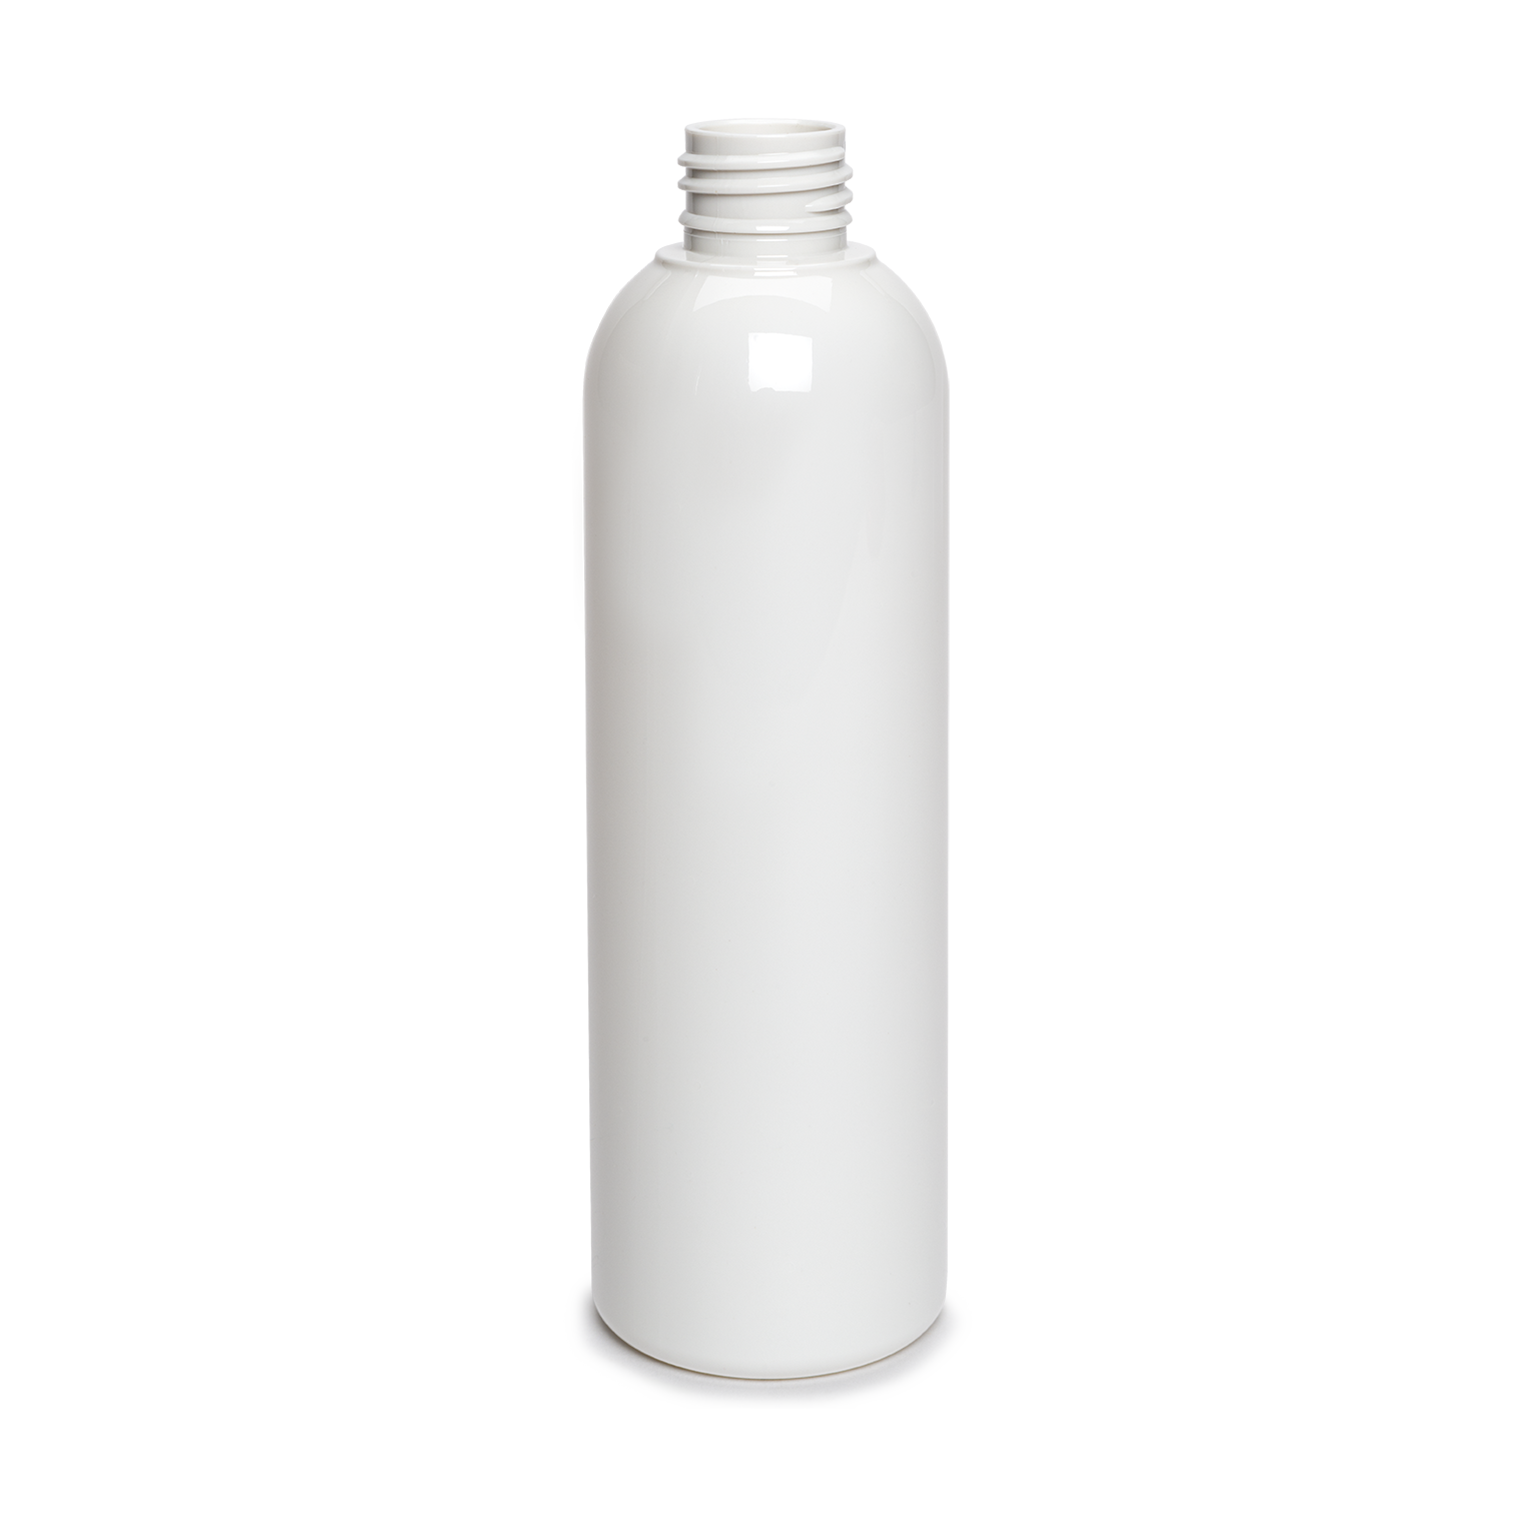 container in   douceur bottle250ml-gcmi 24.410- recycled pet white 100%